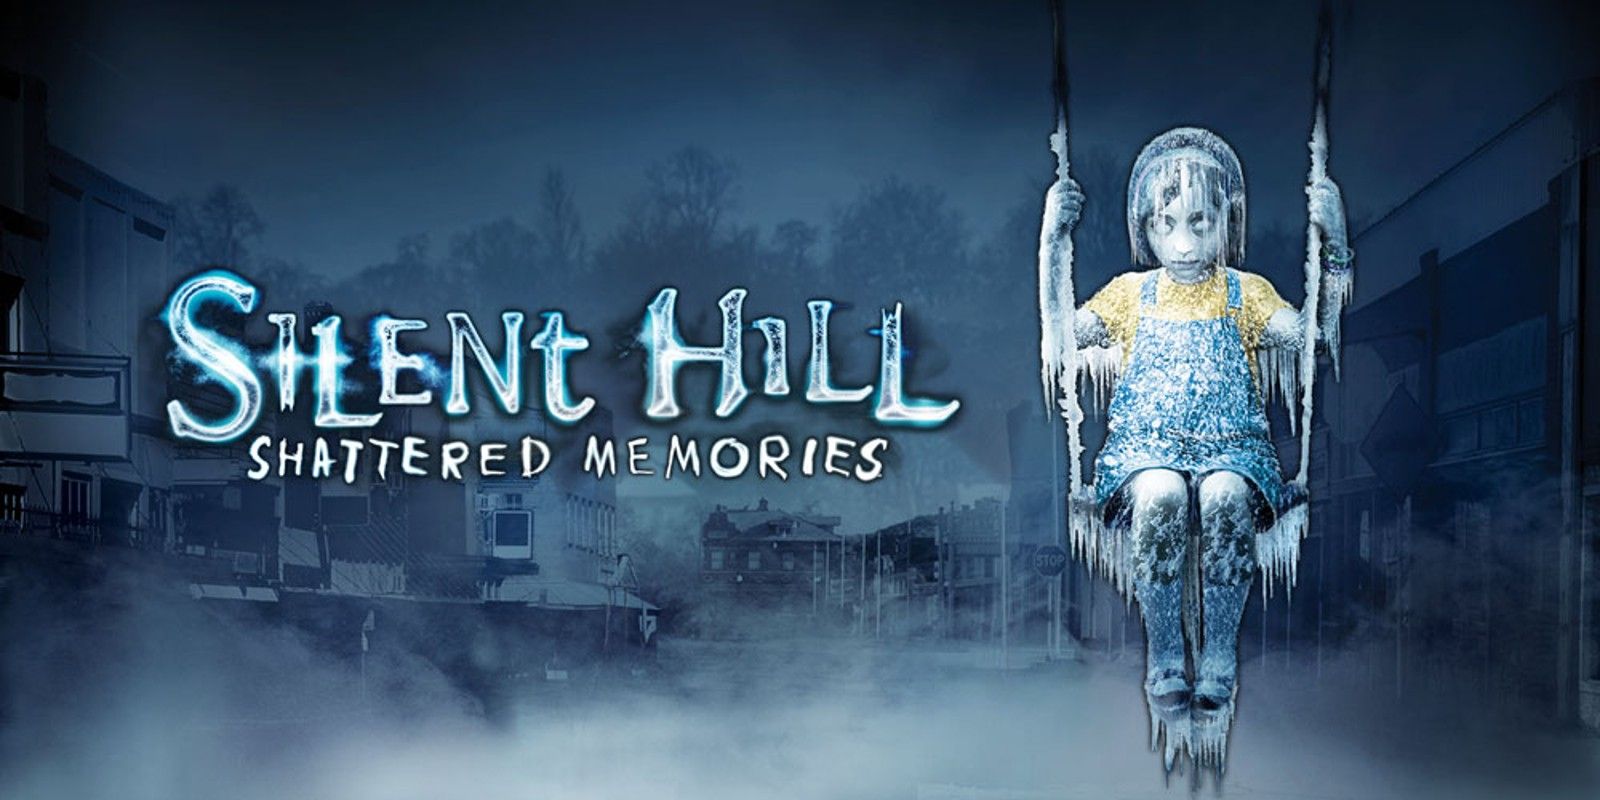 Banner for the game Silent Hill: Shattered Memories featuring a ghost girl on a swing